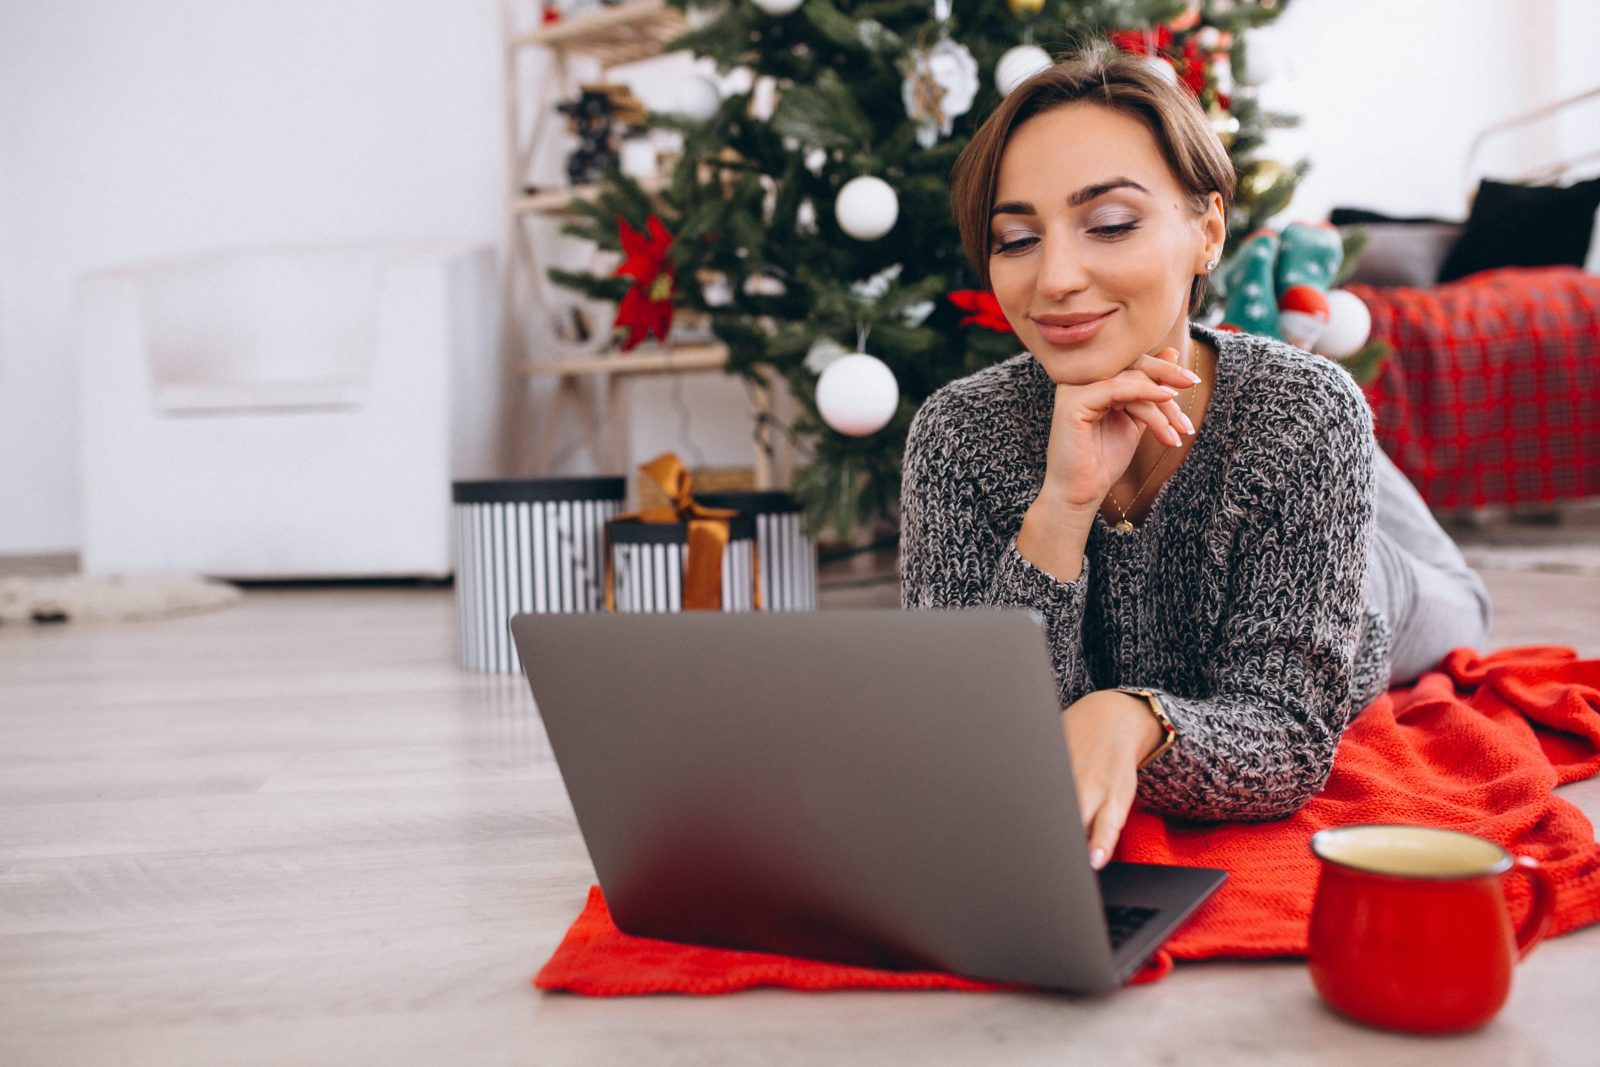 A woman shops online in front of her Christmas tree